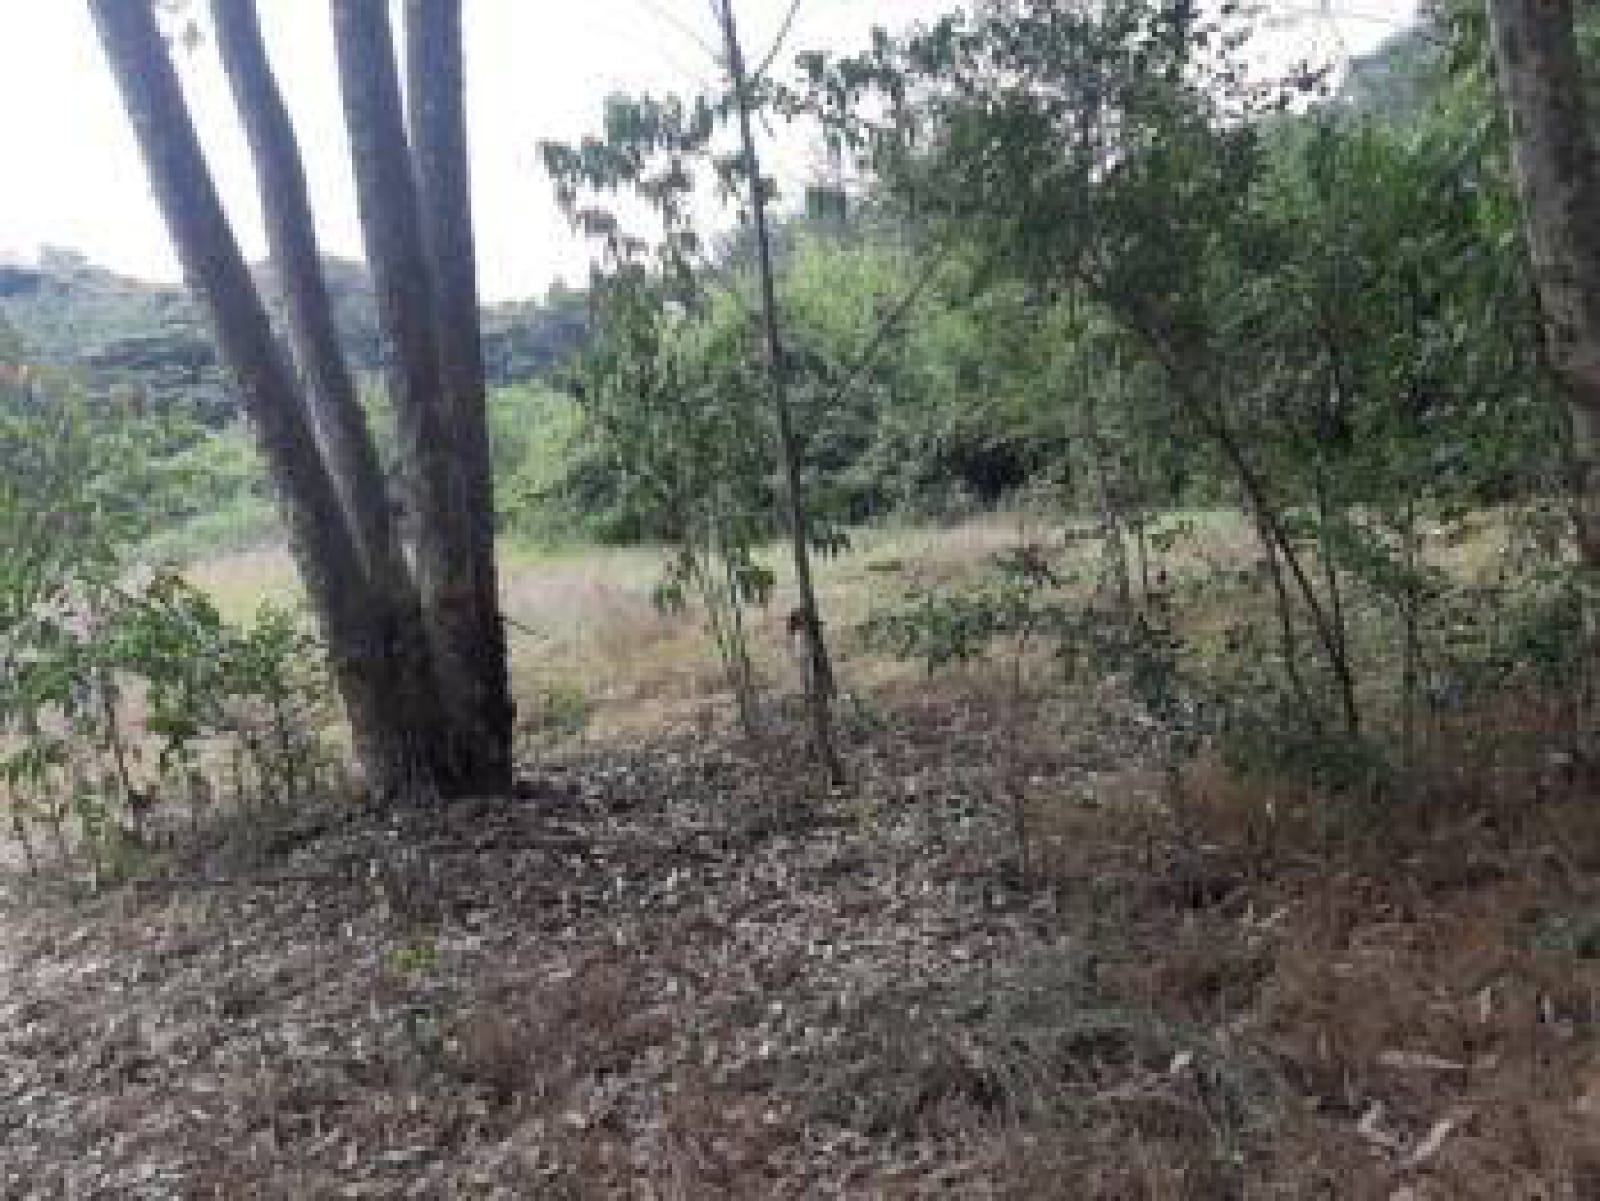 Land for sale in Karen Tree lane 1 Acre Ready Title Deed QUICK SALE Exclusive